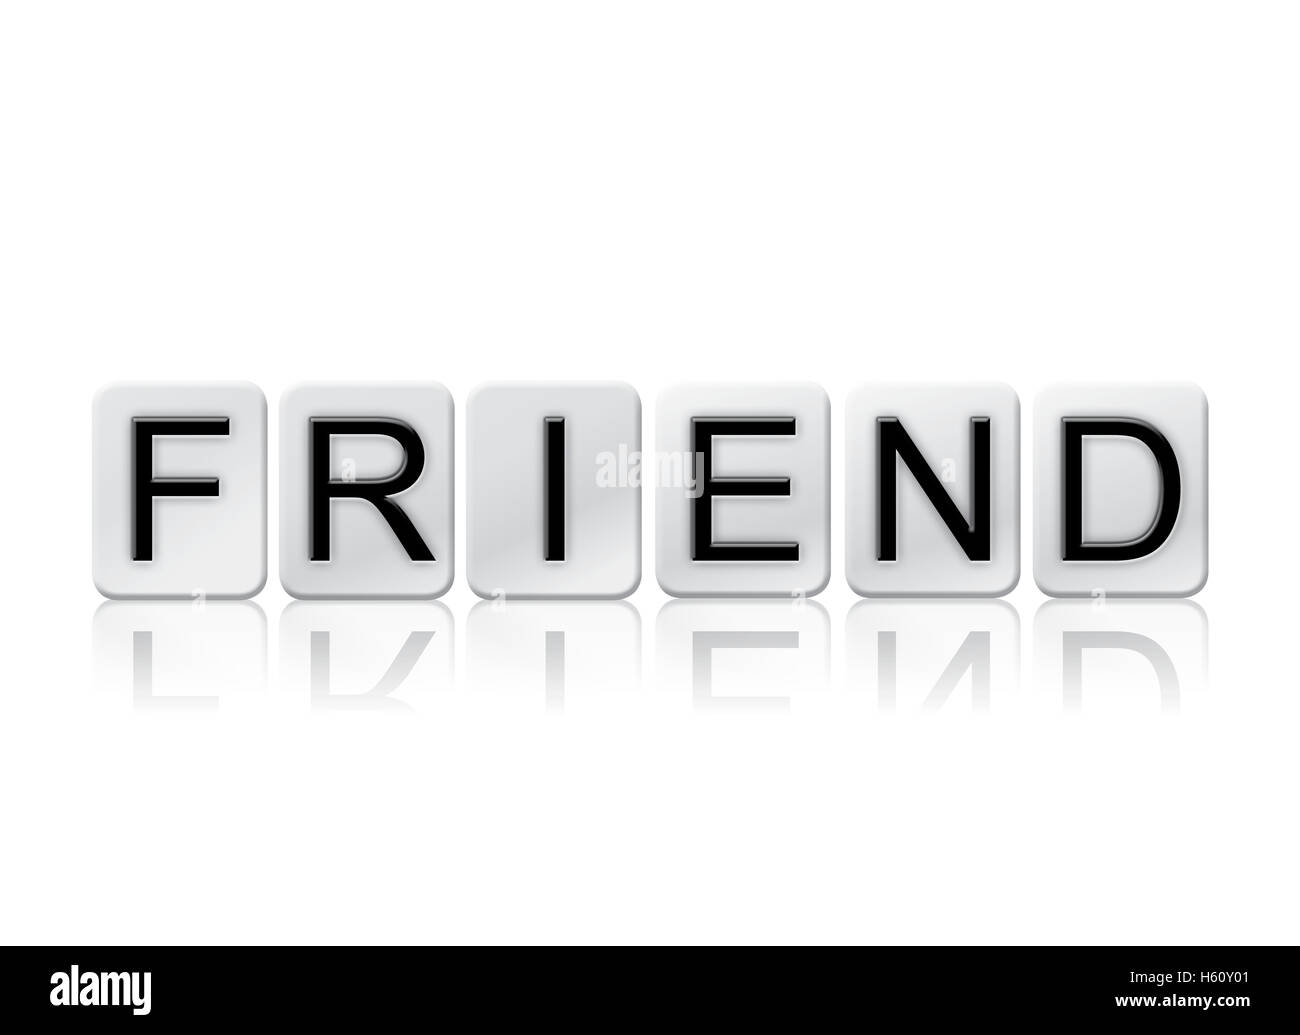 The word 'Friend' written in tile letters isolated on a white background. Stock Photo